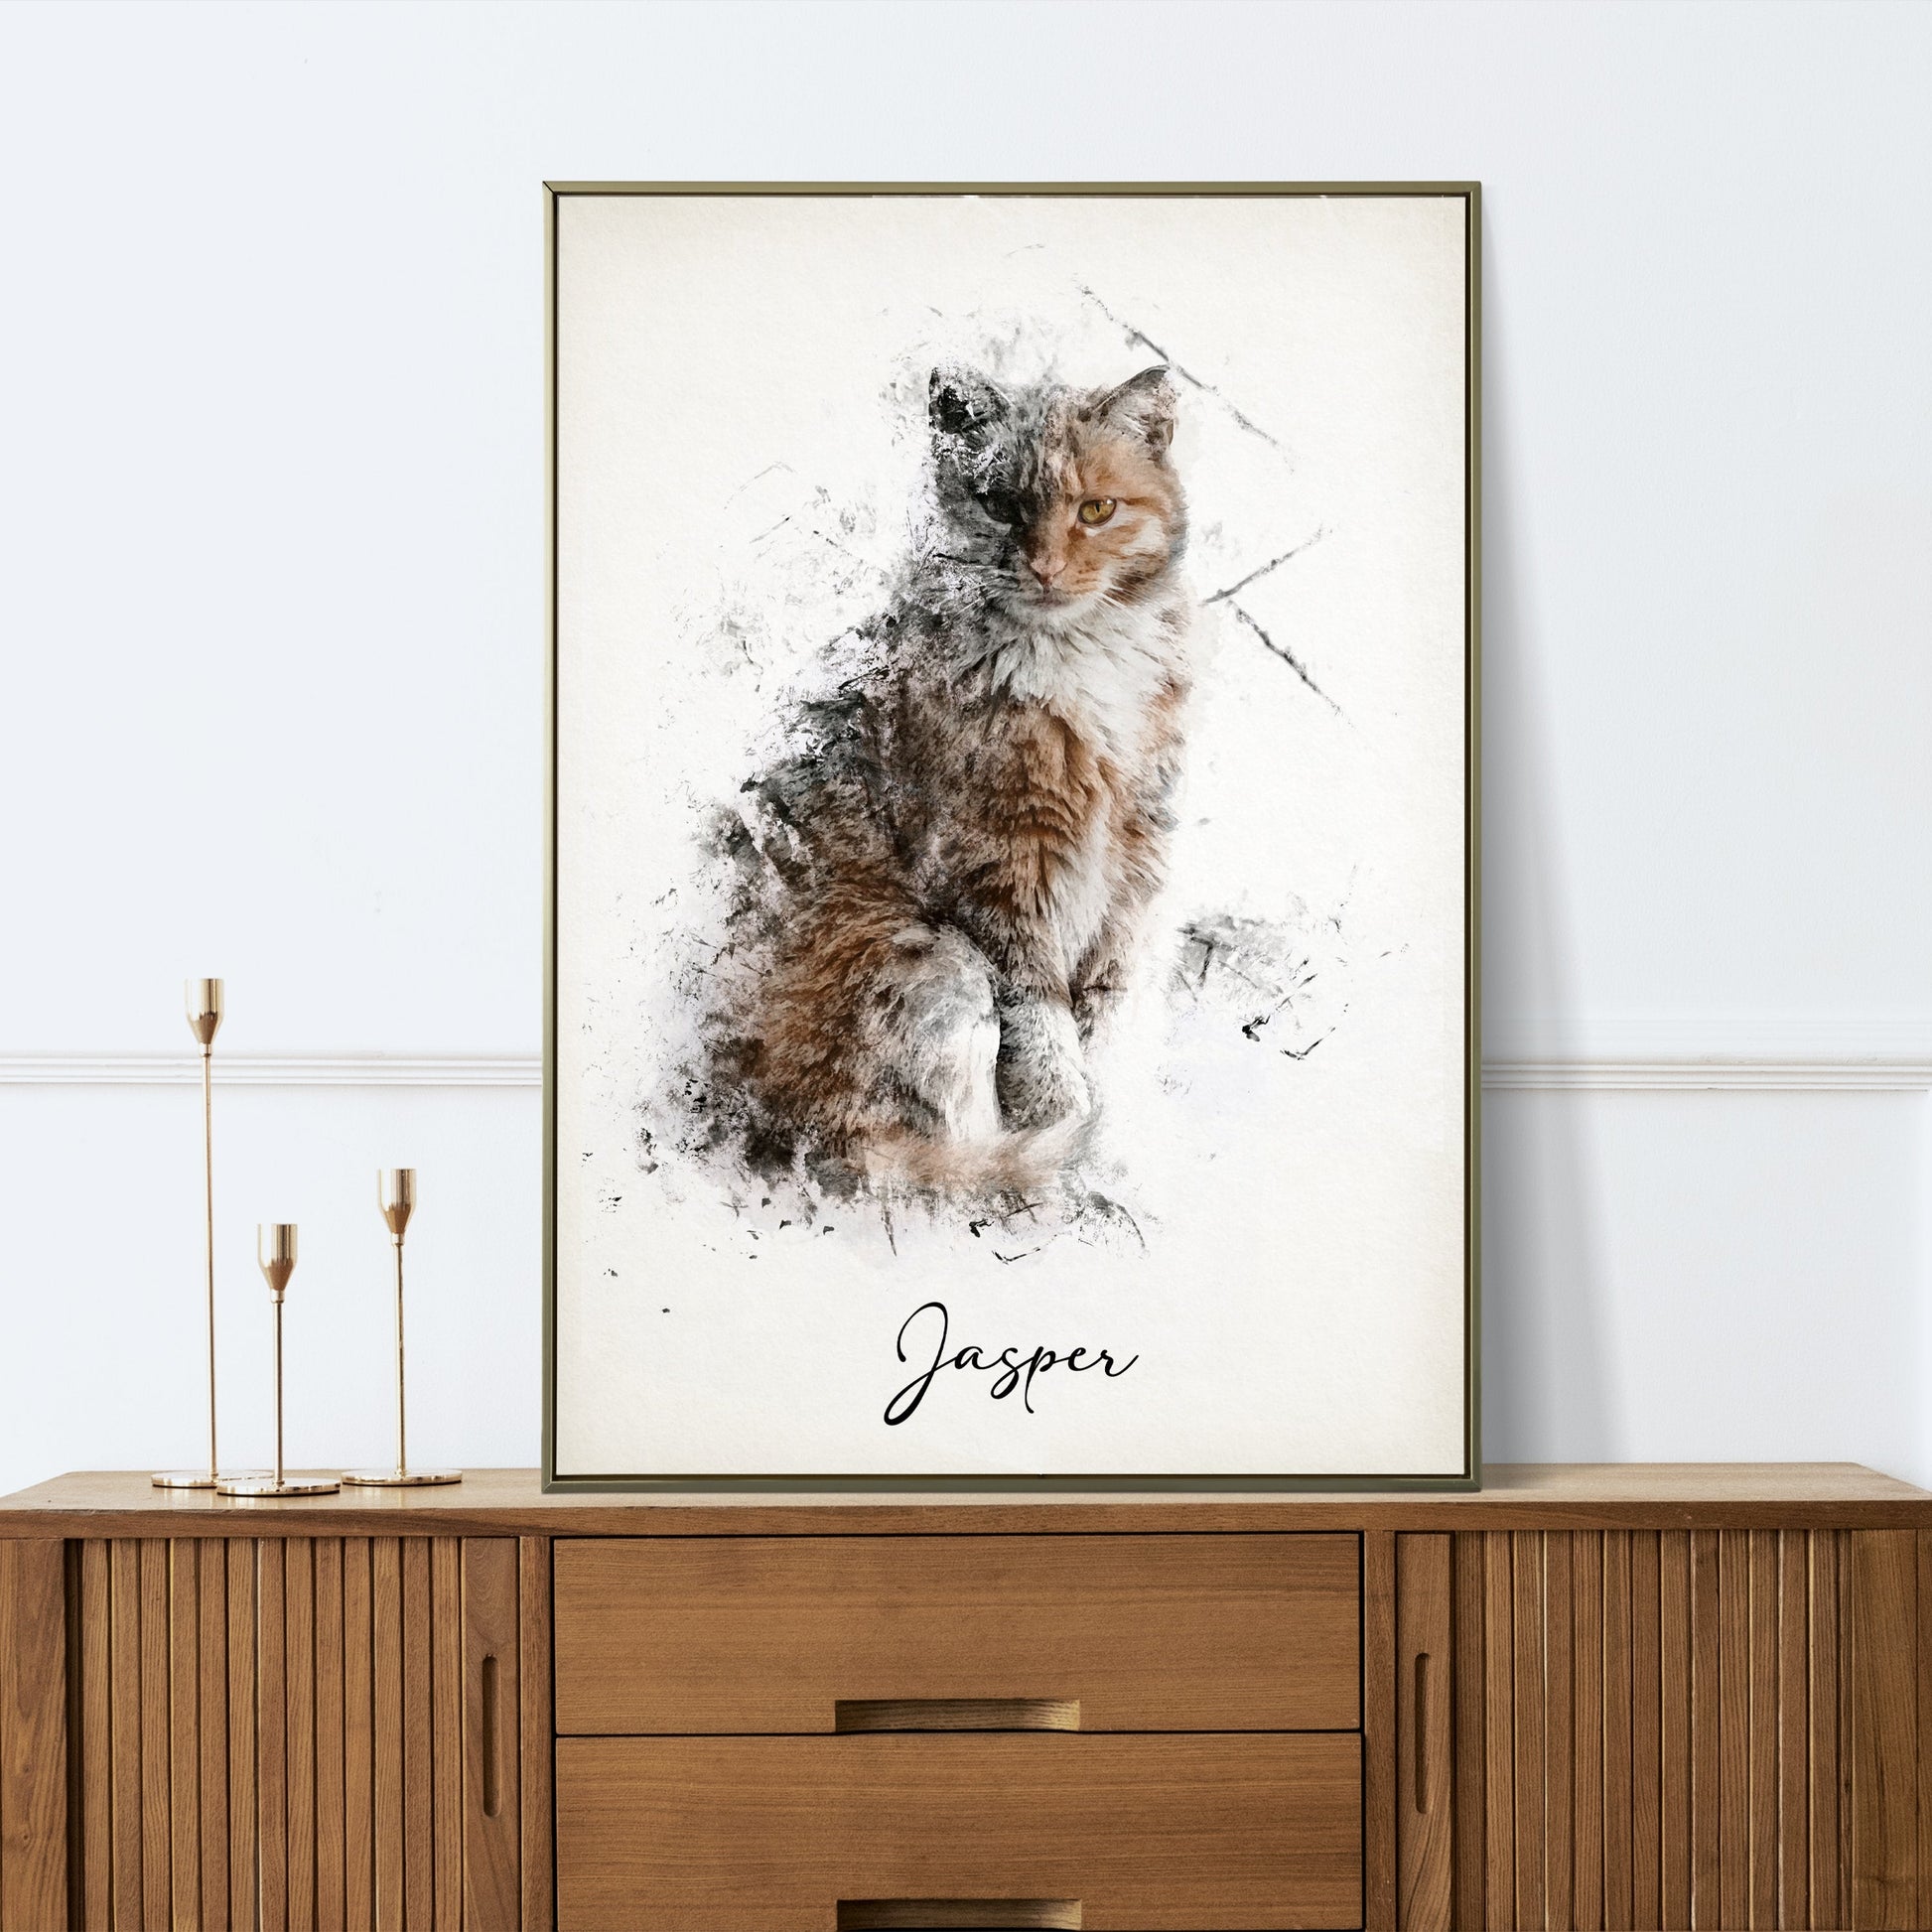 Framed canvas: Personalized cat portrait adorns wall with charm